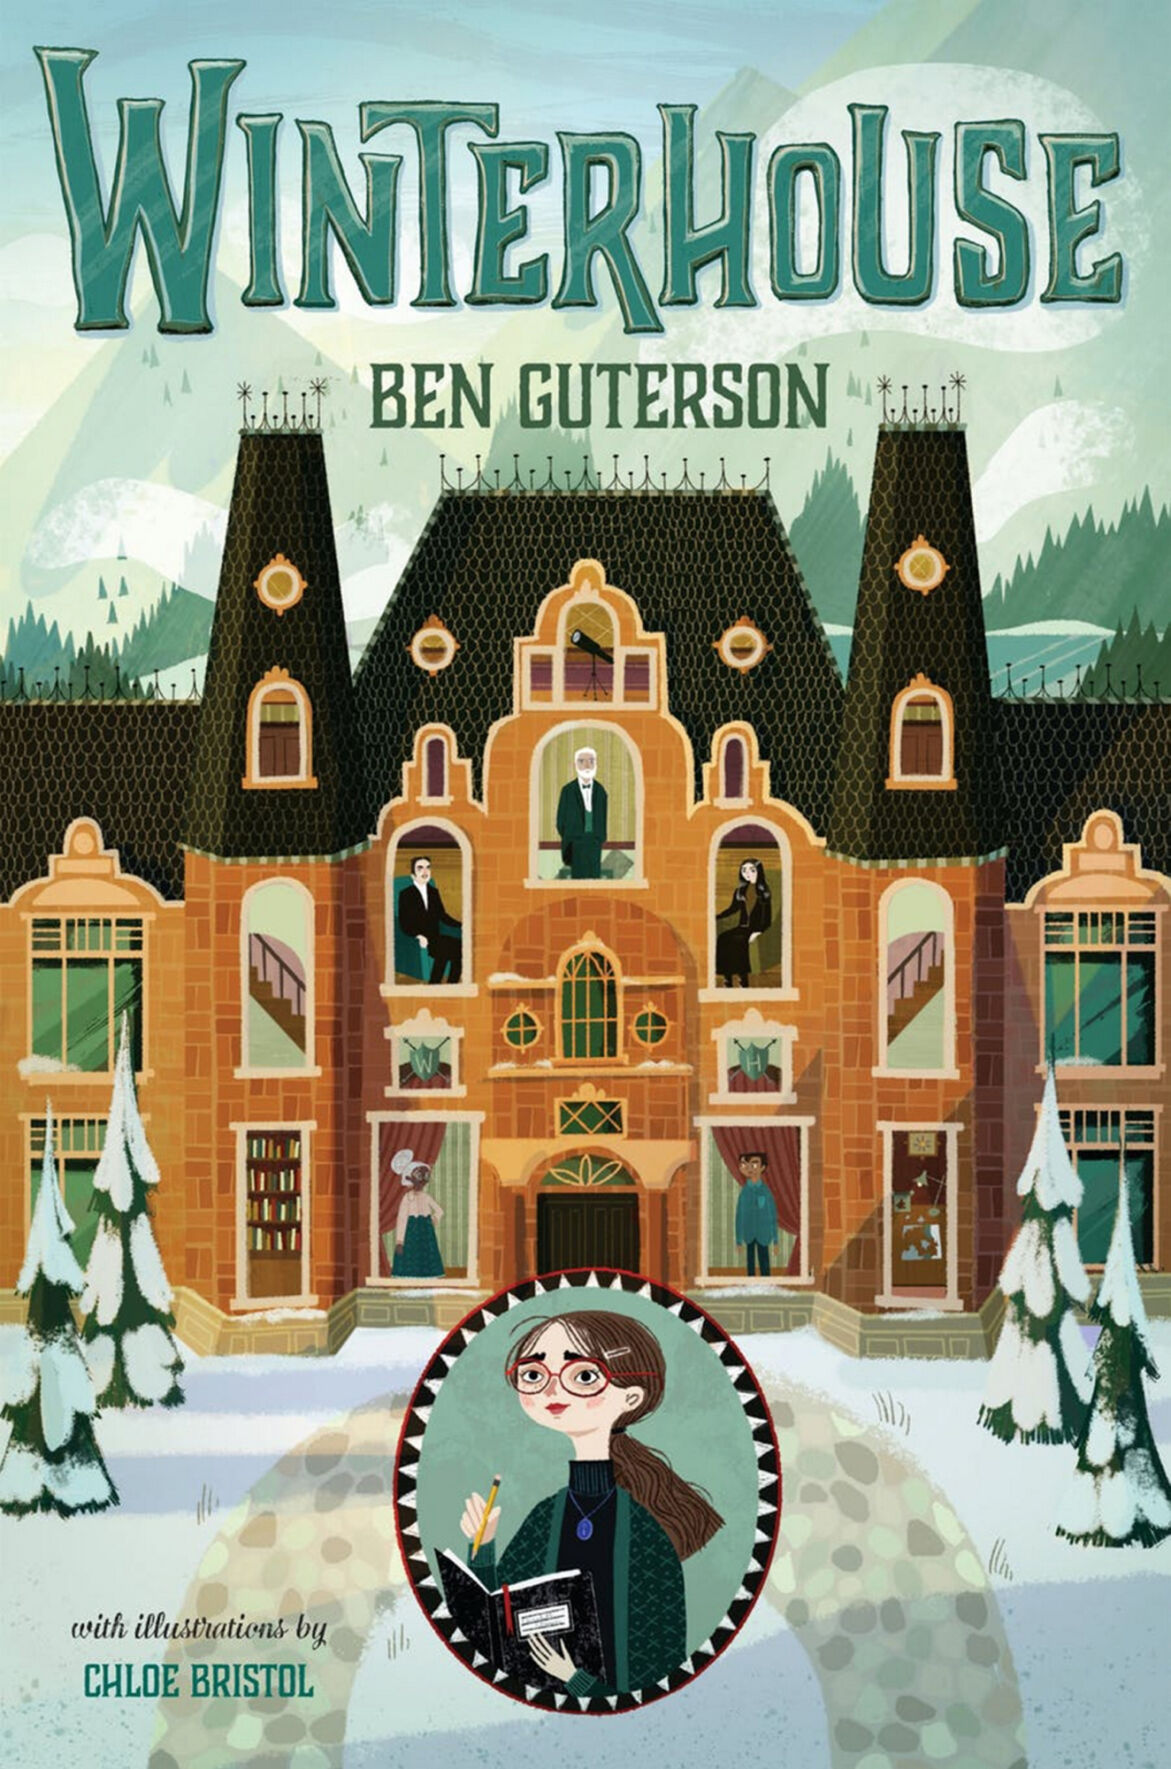 7 magically mysterious adventure series for middle-grade readers